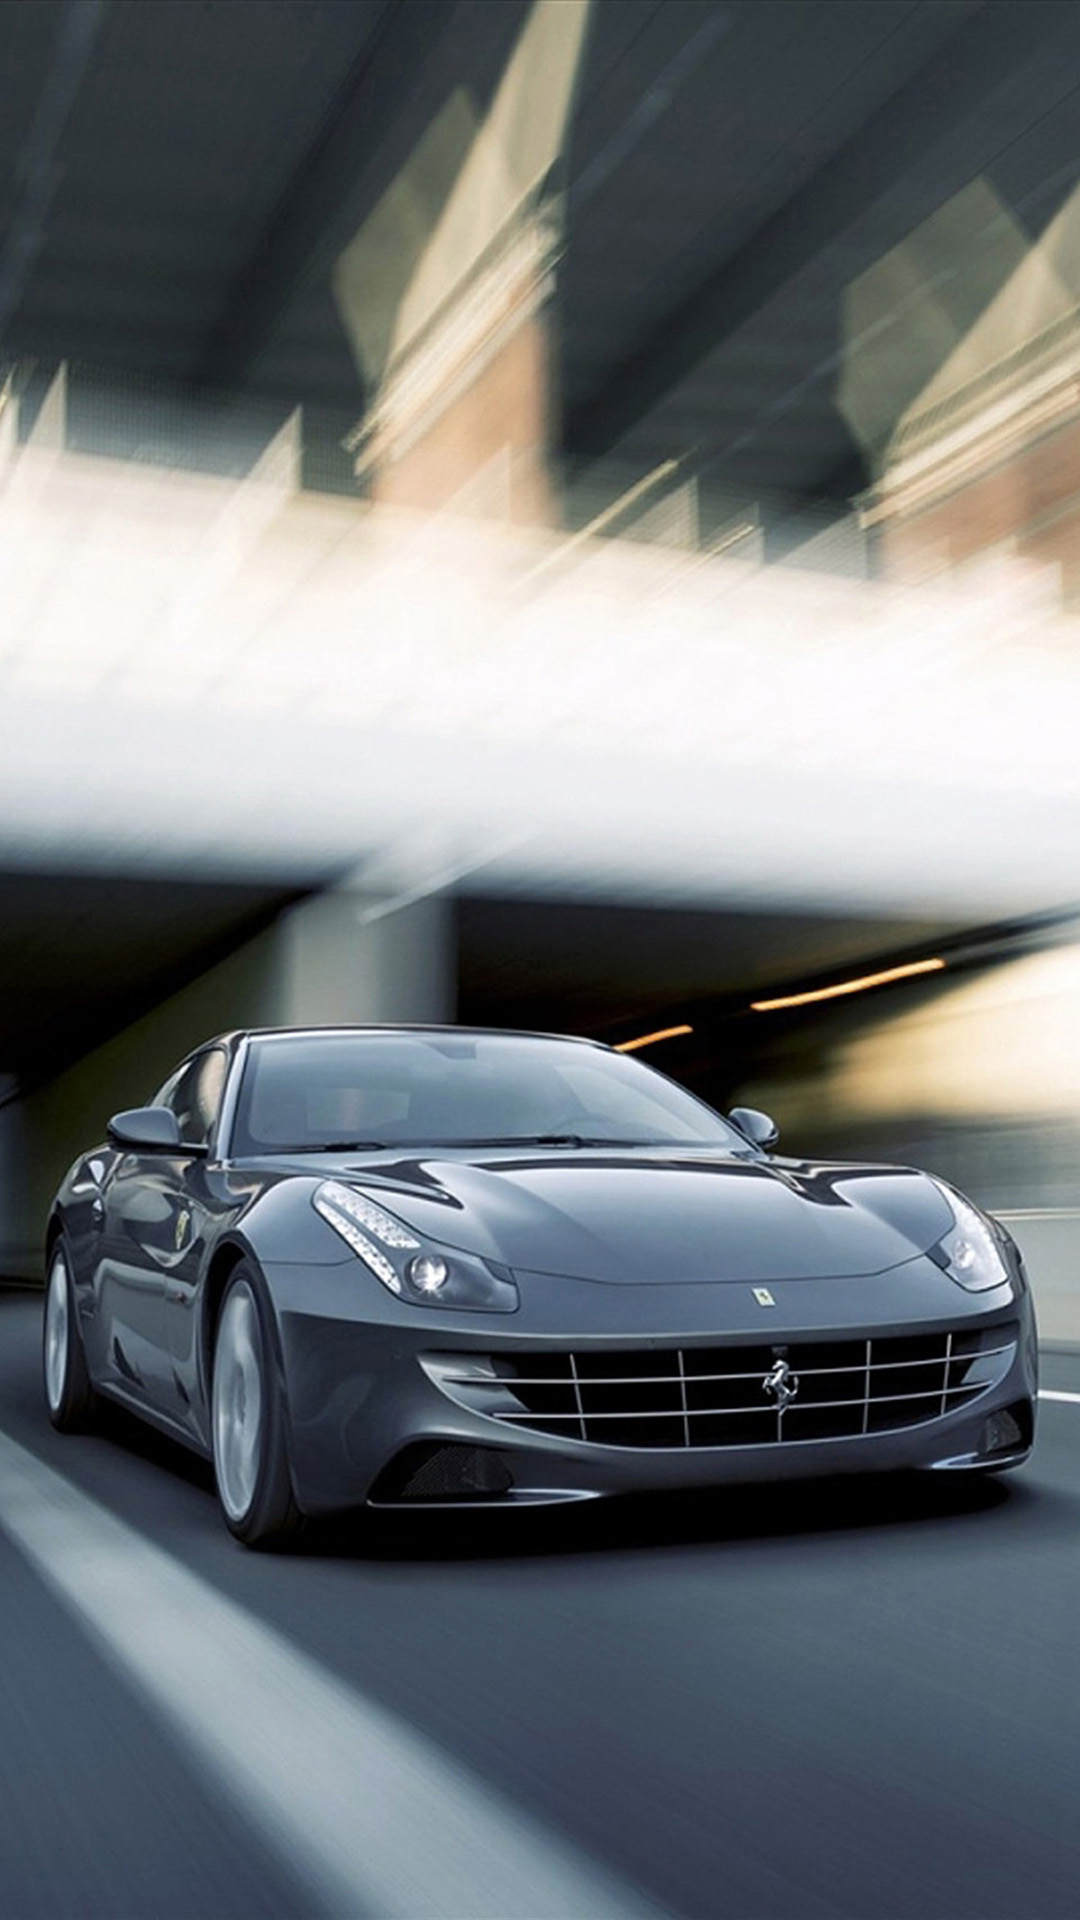 Car Wallpaper Mobile Android